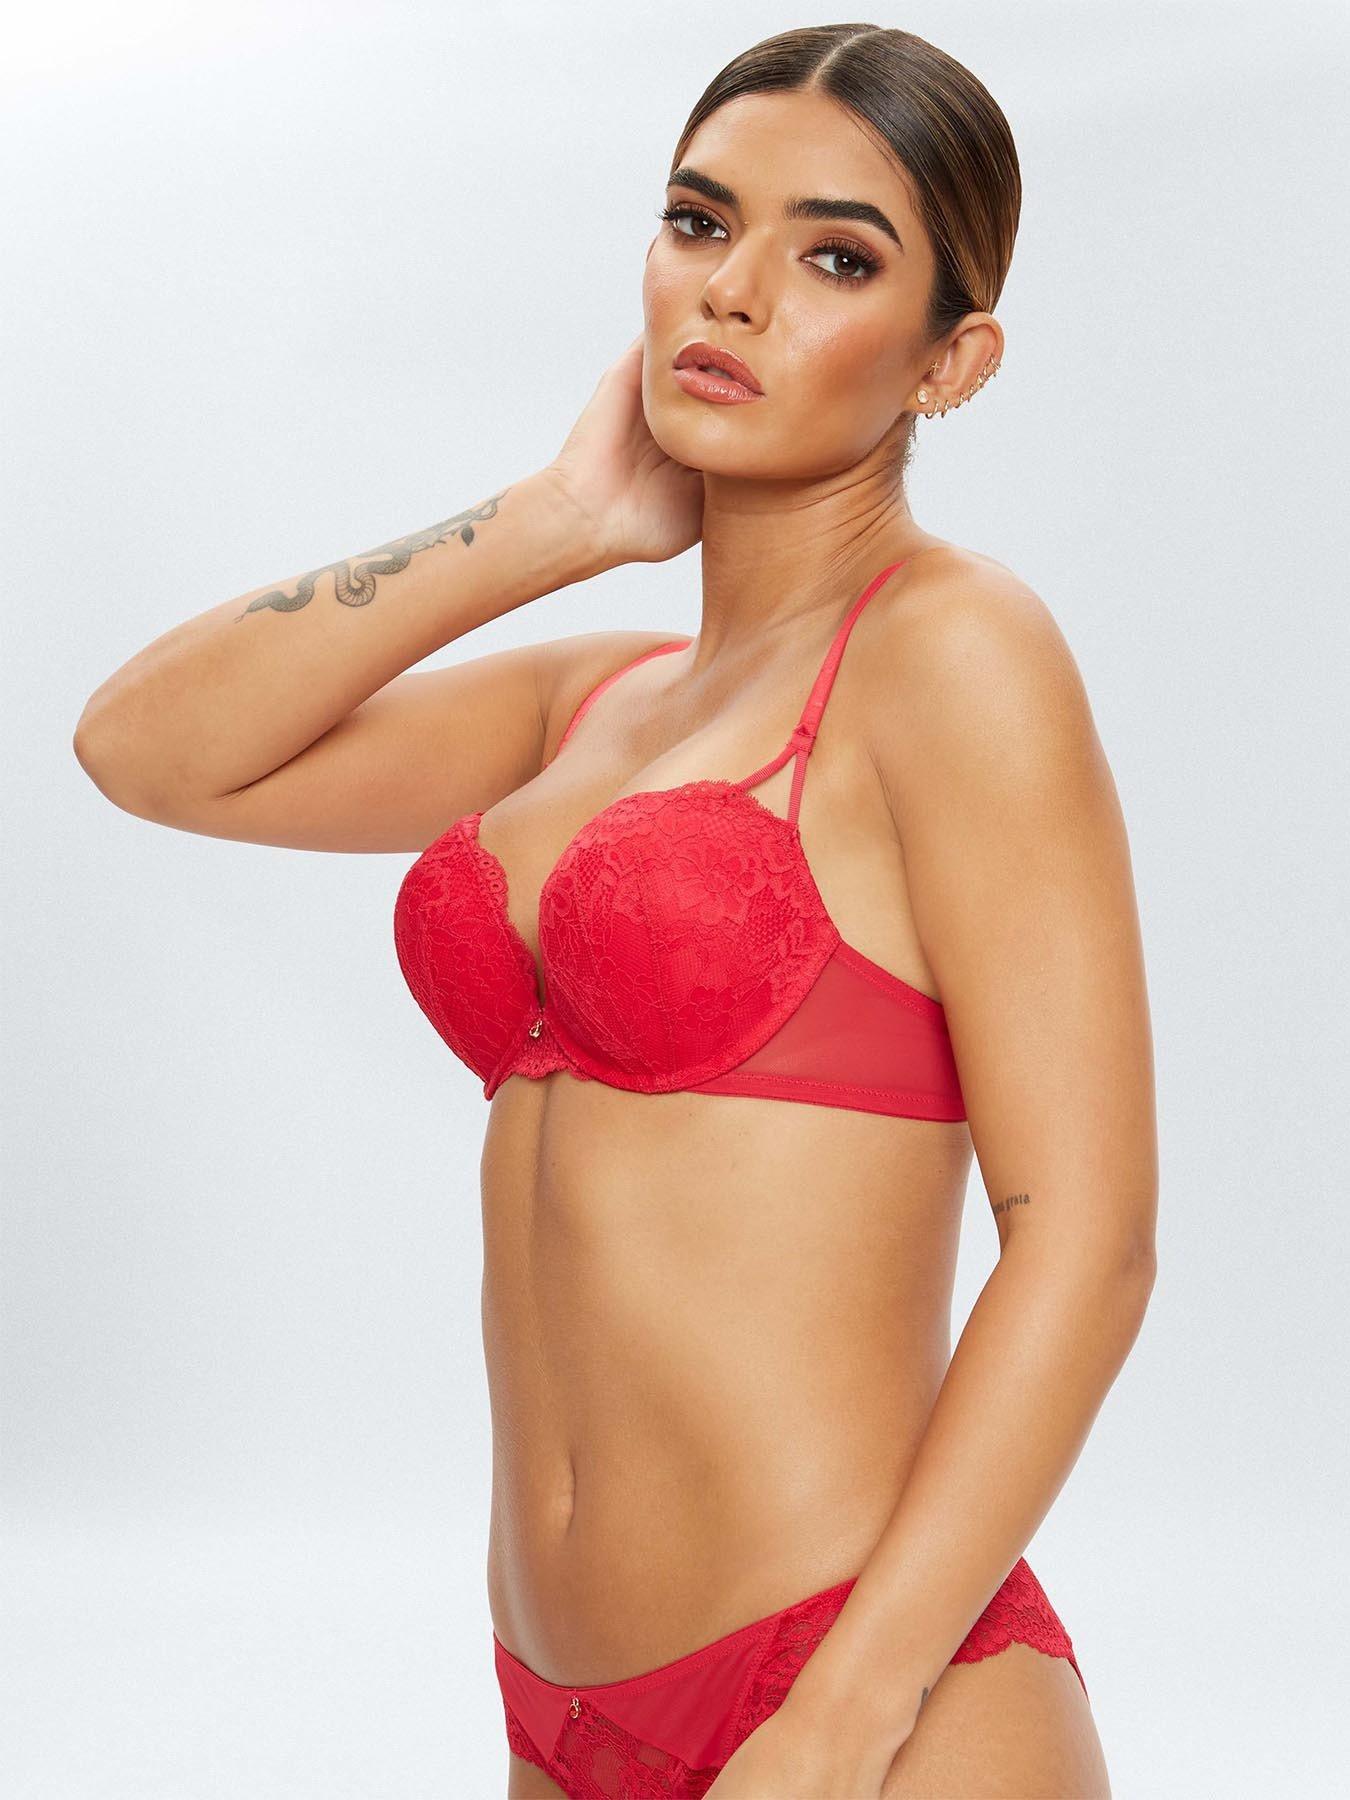 https://media.very.co.uk/i/very/UJFMC_SQ1_0000002882_BRIGHT_RED_MDf/ann-summers-sexy-lace-planet-boost-red.jpg?$180x240_retinamobilex2$